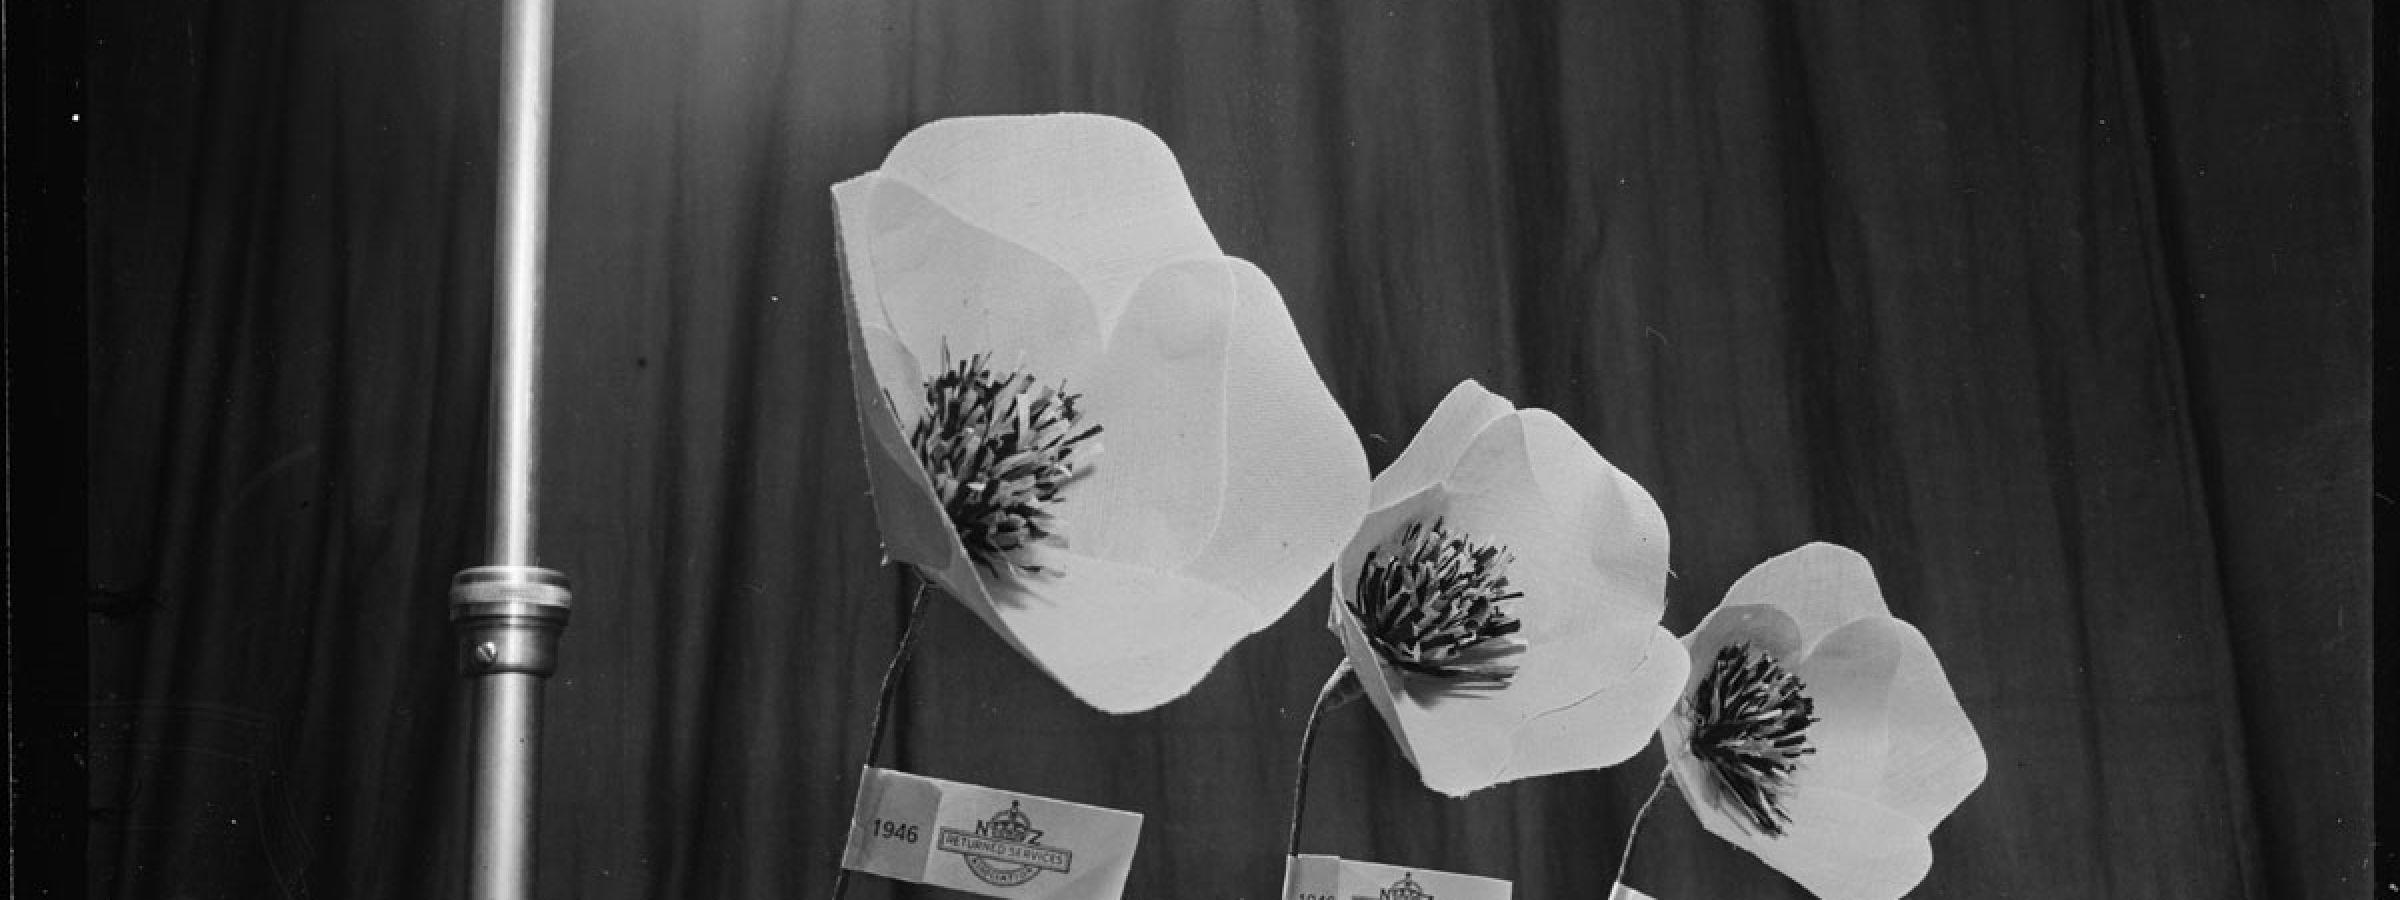 Artificial poppies for sale for Anzac Day photographed circa 23 April 1951